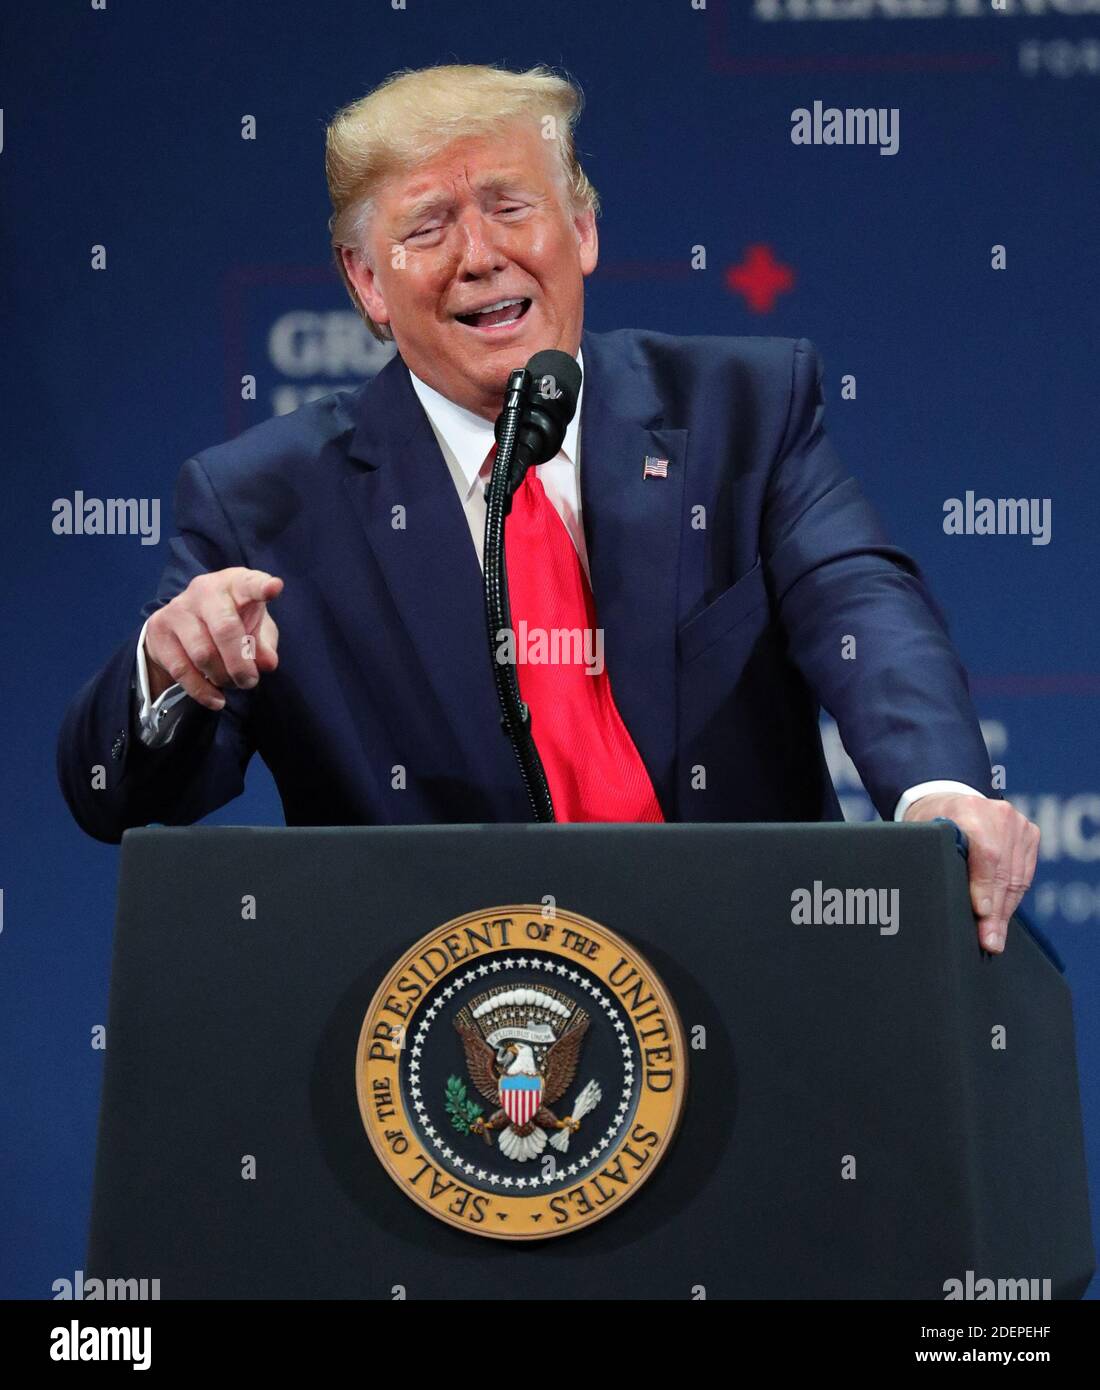 NO FILM, NO VIDEO, NO TV, NO DOCUMENTARY - President Donald Trump jokes with supporters during his appearance at the Sharon L. Morris Performing Arts Center in The Villages, Fla., Thursday, October 3, 2019. Photo by Joe Burbank/Orlando Sentinel/TNS/ABACAPRESS.COM Stock Photo